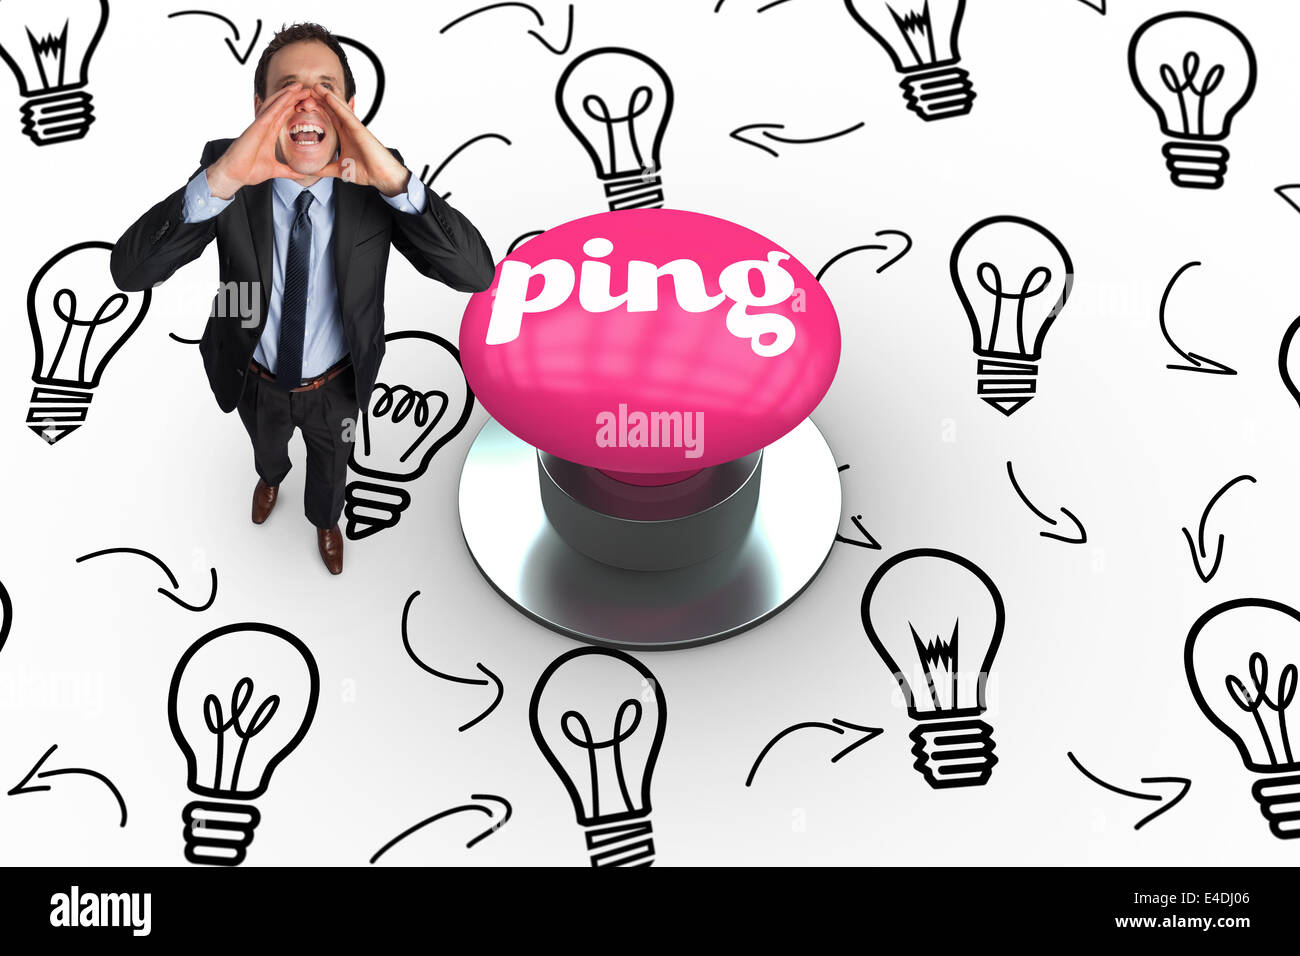 Ping against pink push button Stock Photo